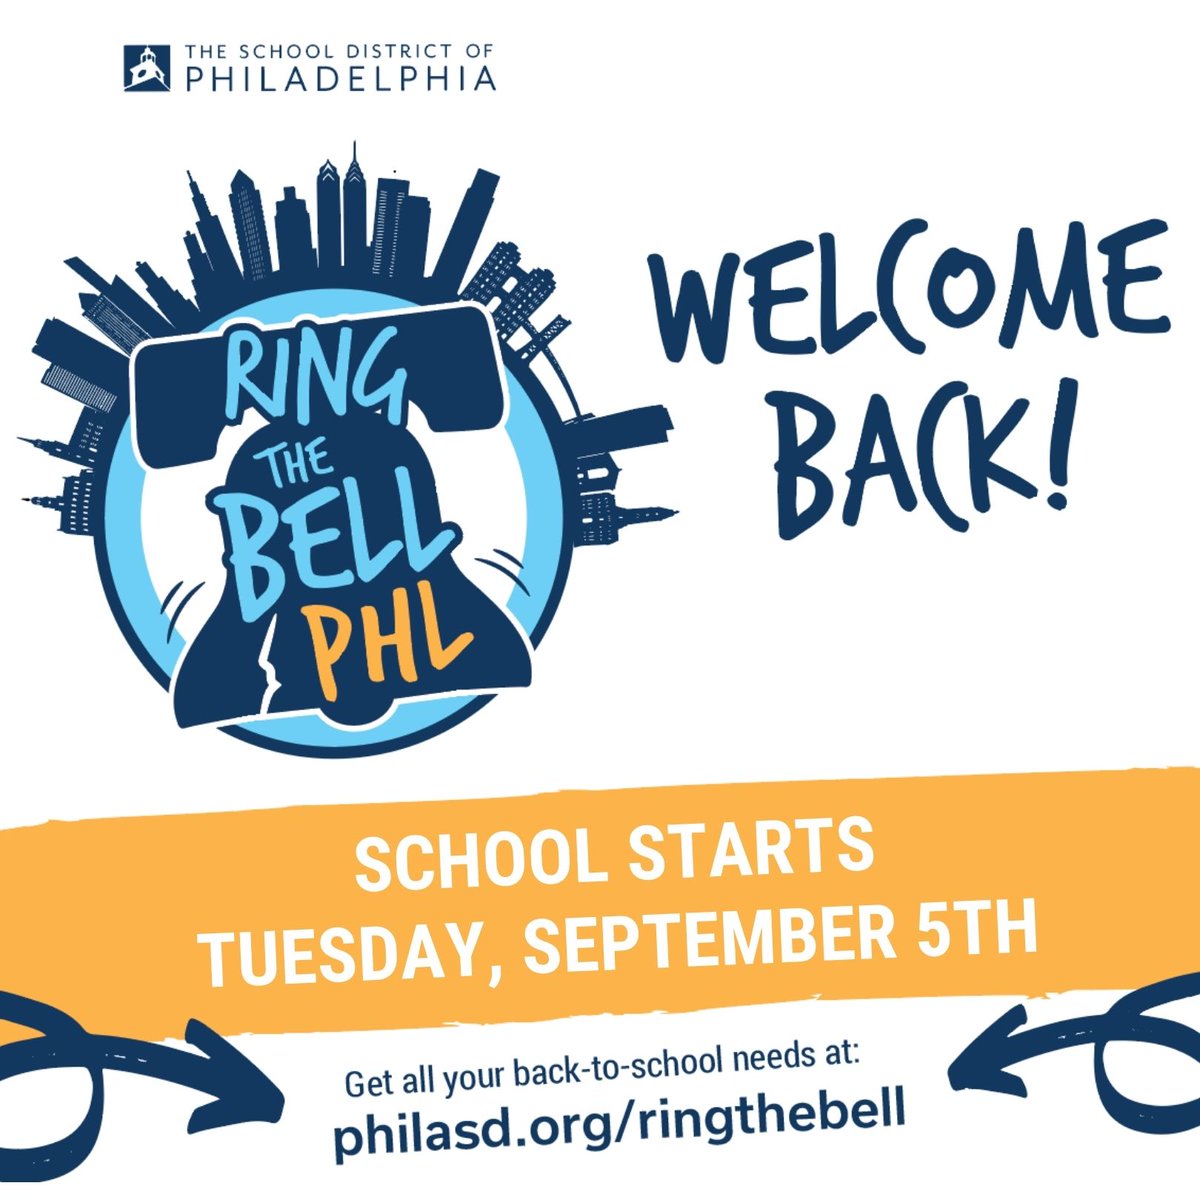 It's the first day of school! Welcome Back! #PHLED #RingTheBellPHL